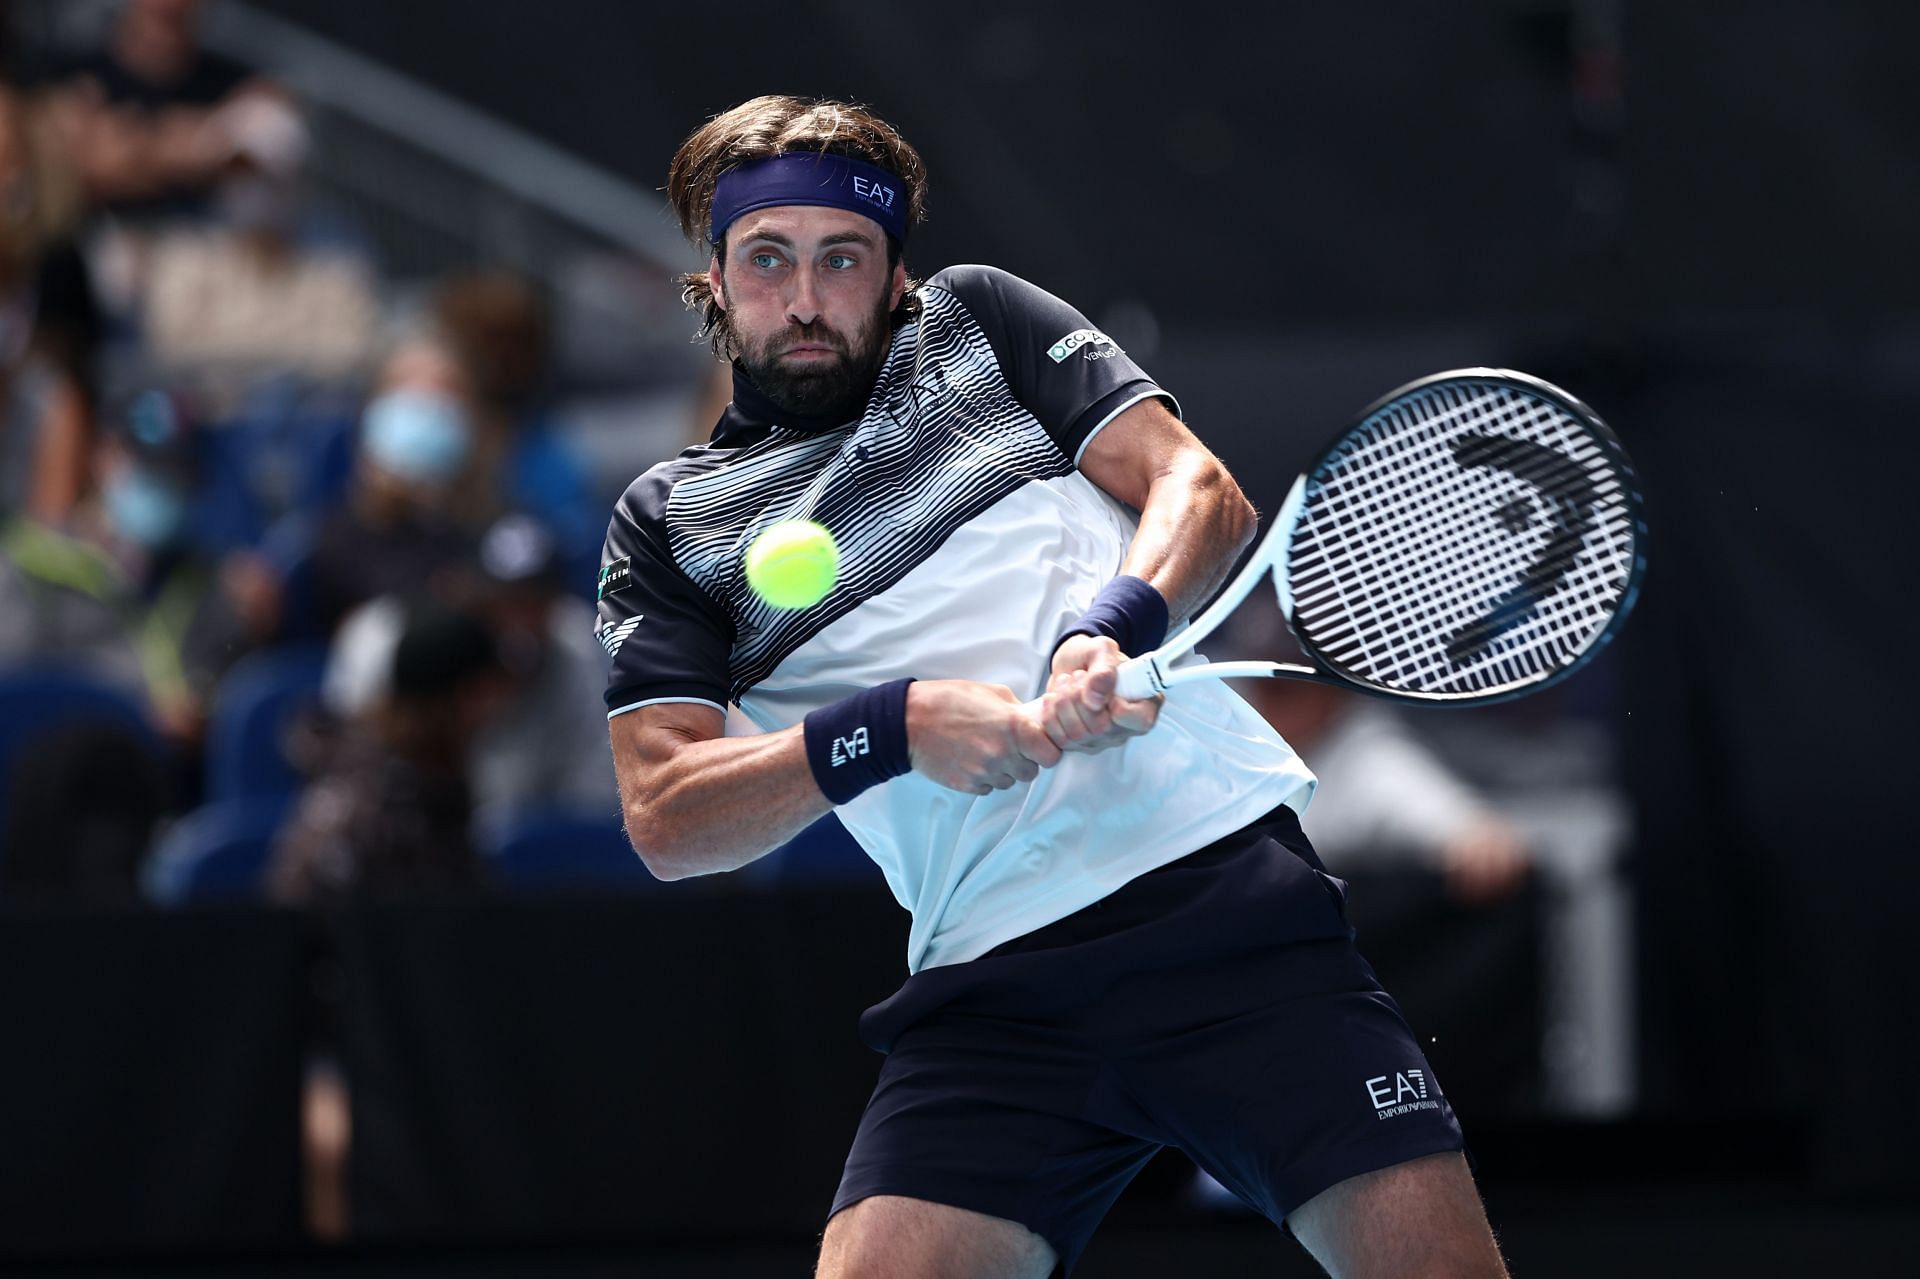 Basilashvili will look to dictate play from the baseline.